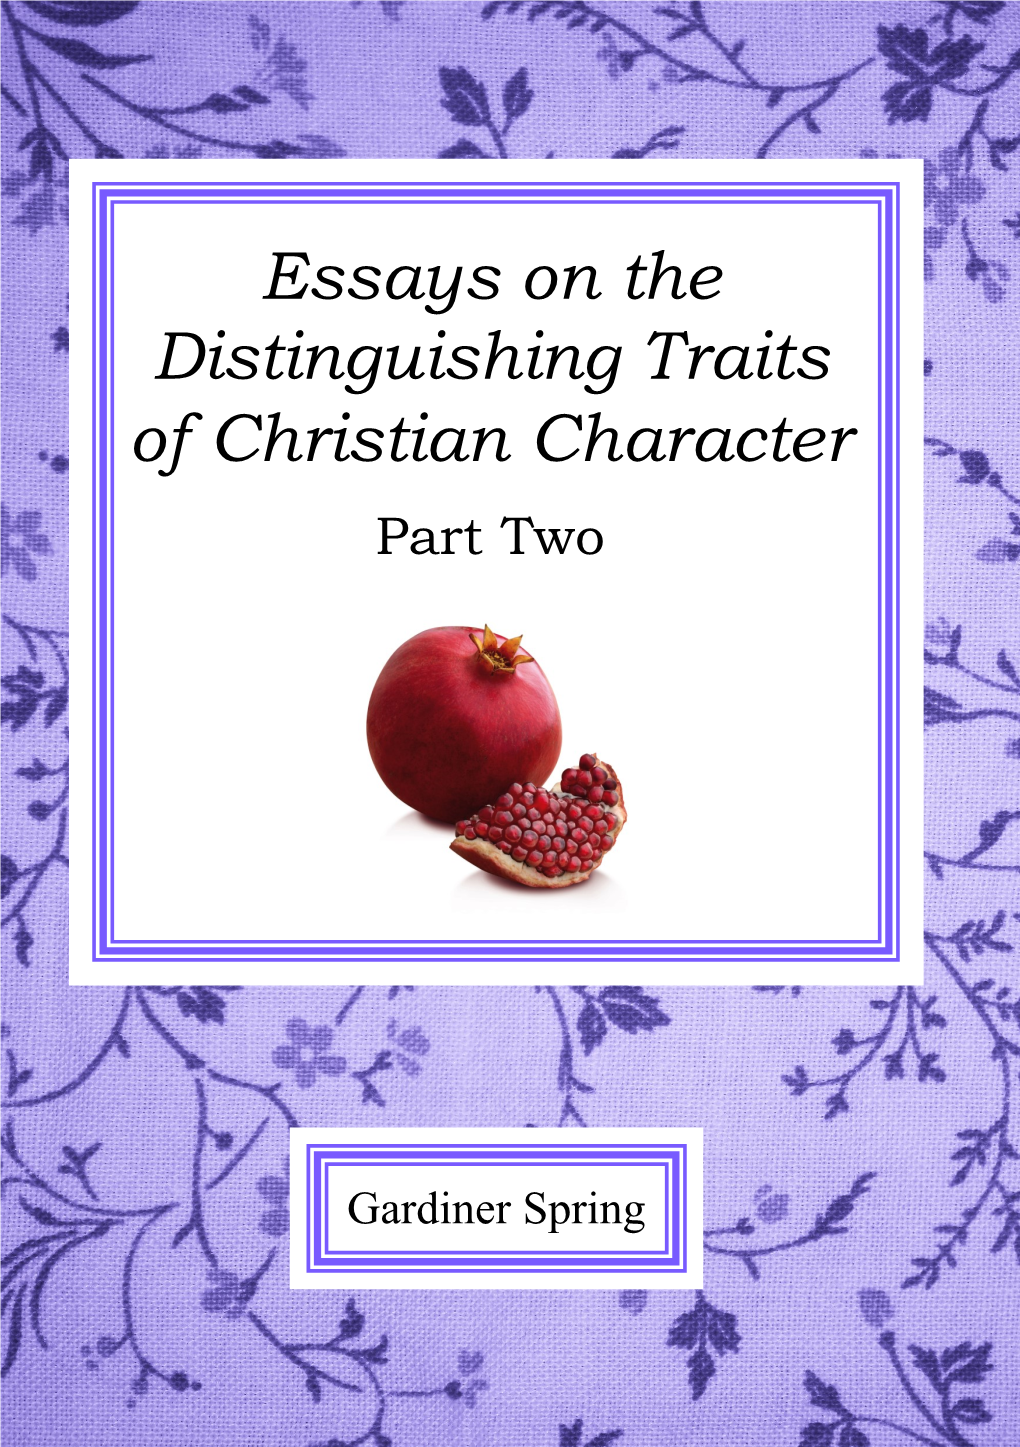 Essays on the Distinguishing Traits of Christian Character Part Two